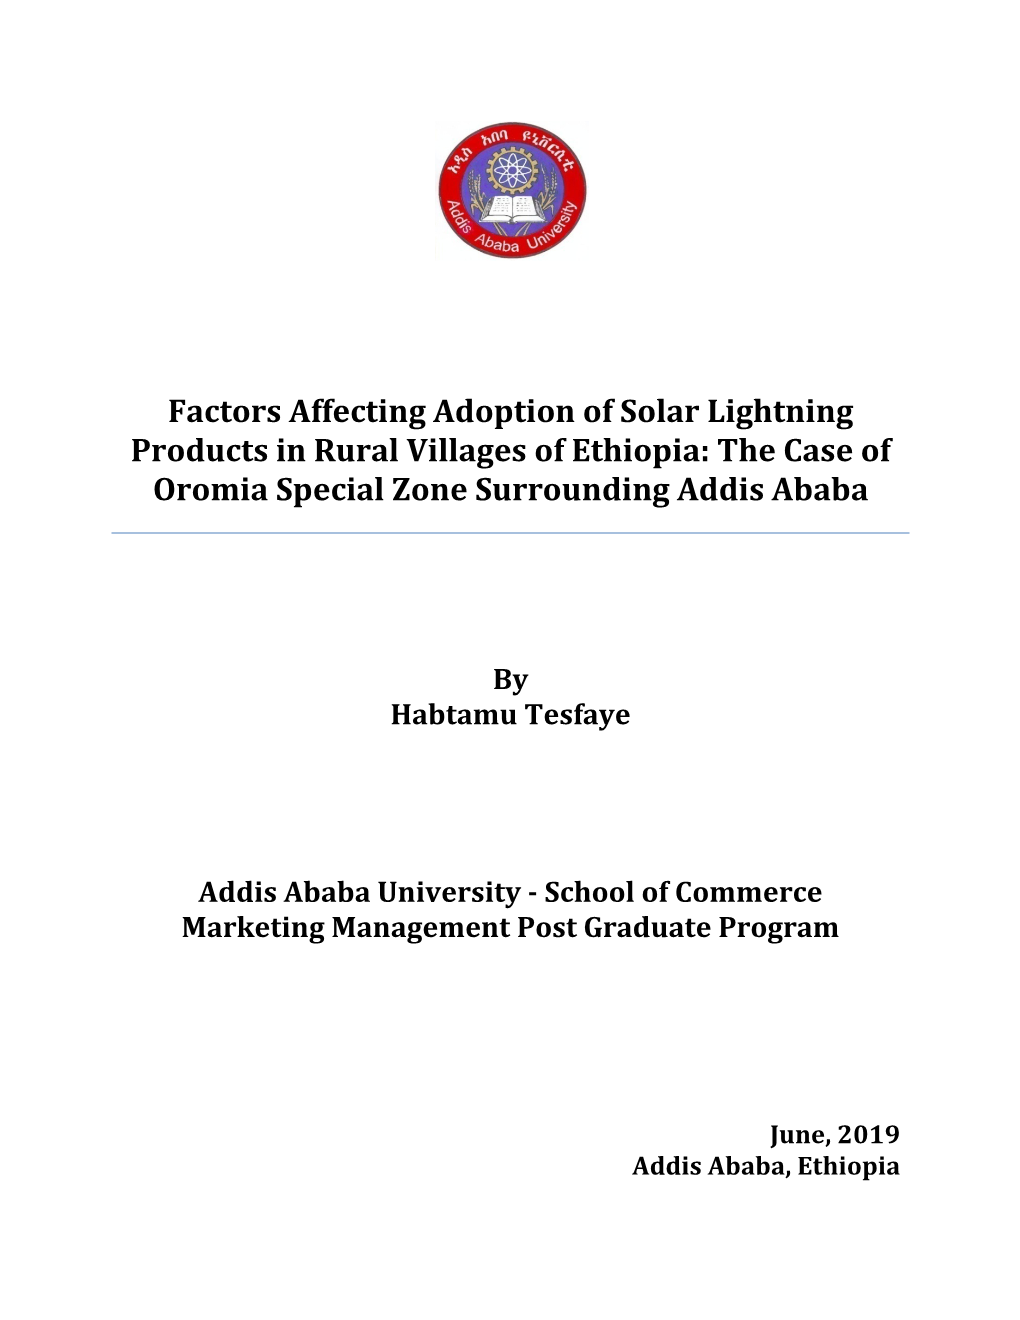 Factors Affecting Adoption of Solar Lightning Products in Rural Villages of Ethiopia: the Case of Oromia Special Zone Surrounding Addis Ababa